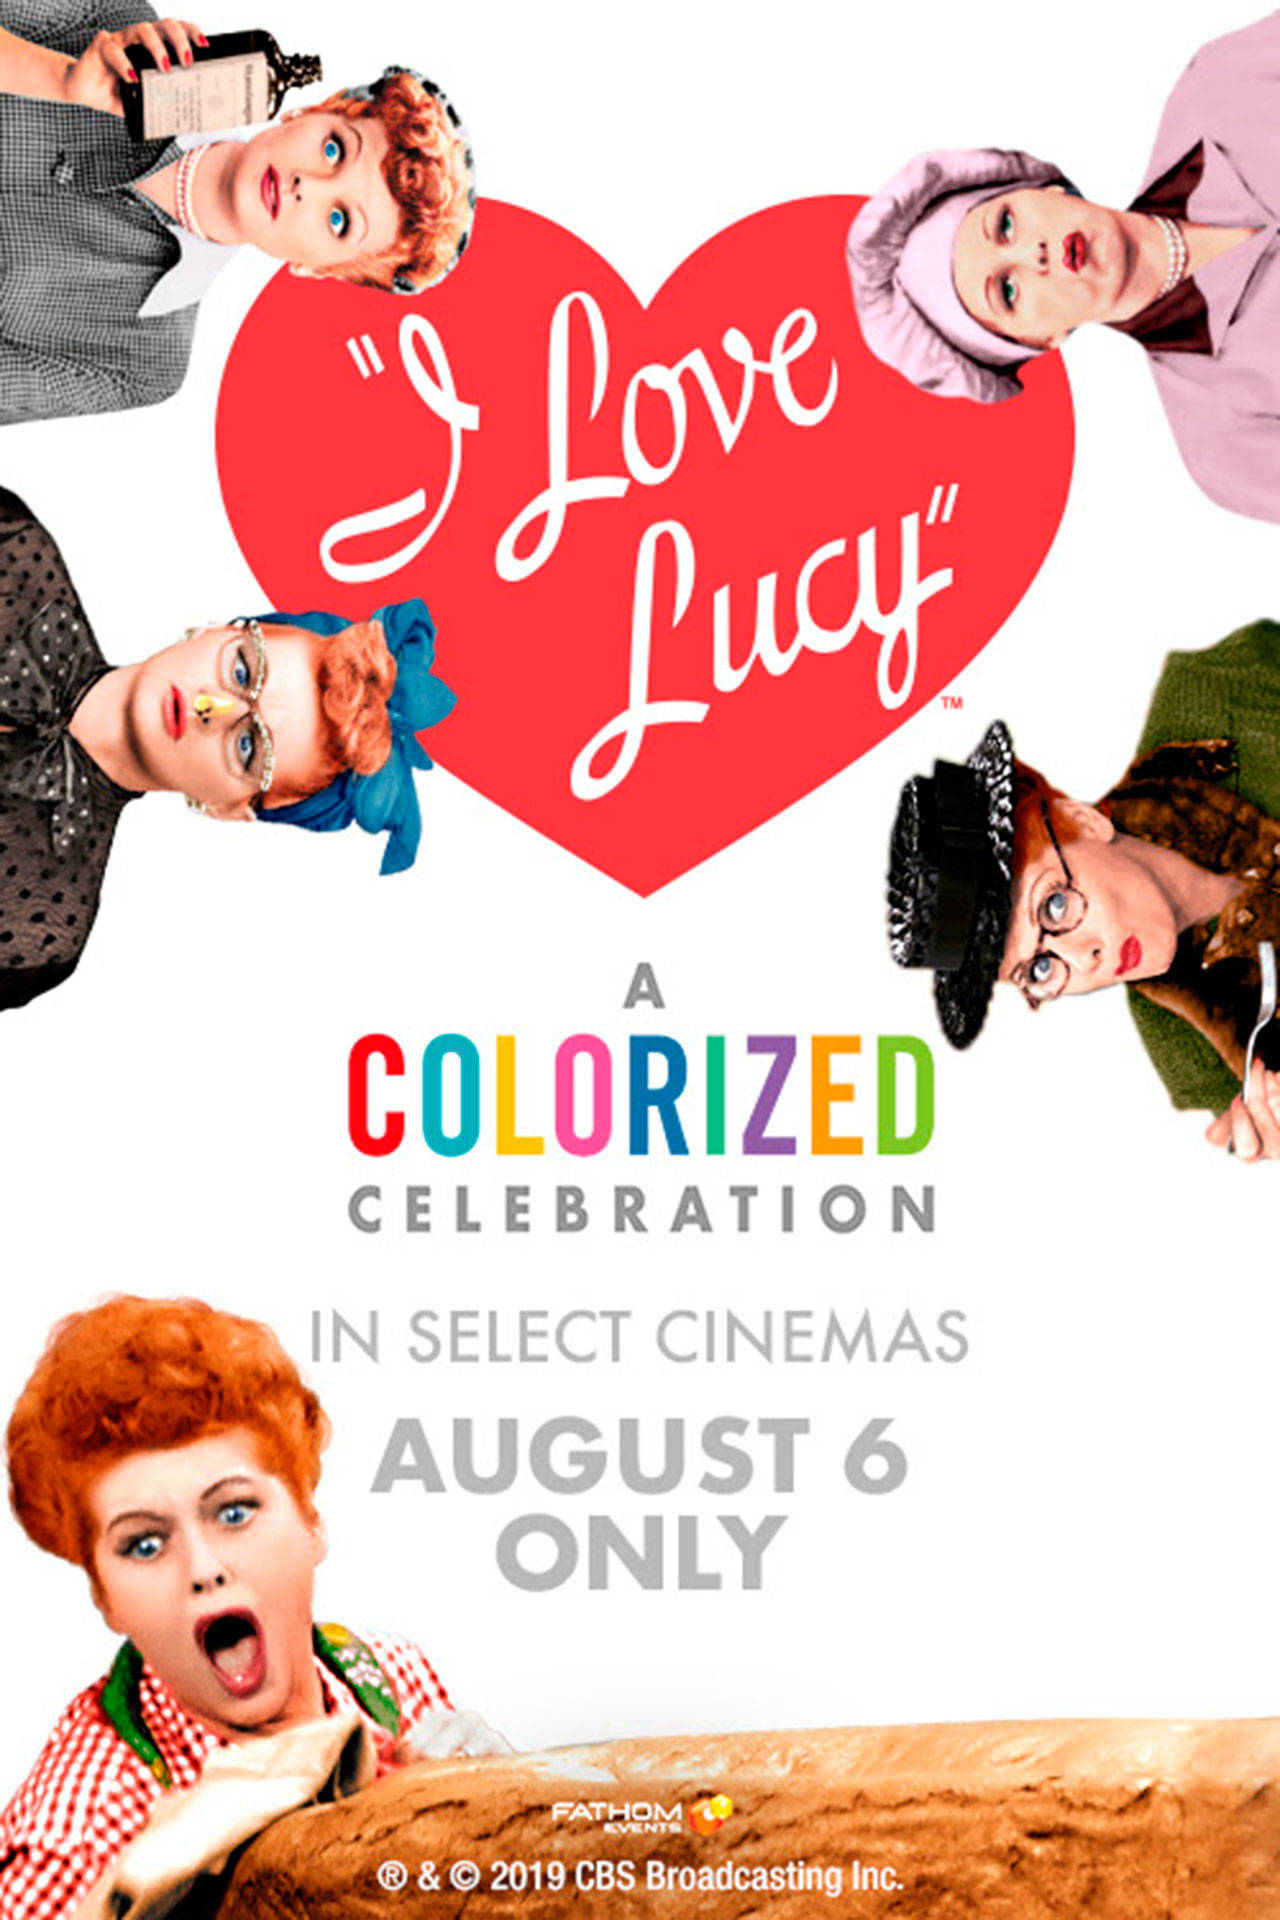 Image courtesy of Bainbridge Cinemas | A special revamp of five episodes of “I Love Lucy,” now in color and with never-before-seen bonus content, will play at Bainbridge Cinemas at 7 p.m. Tuesday, Aug. 6.